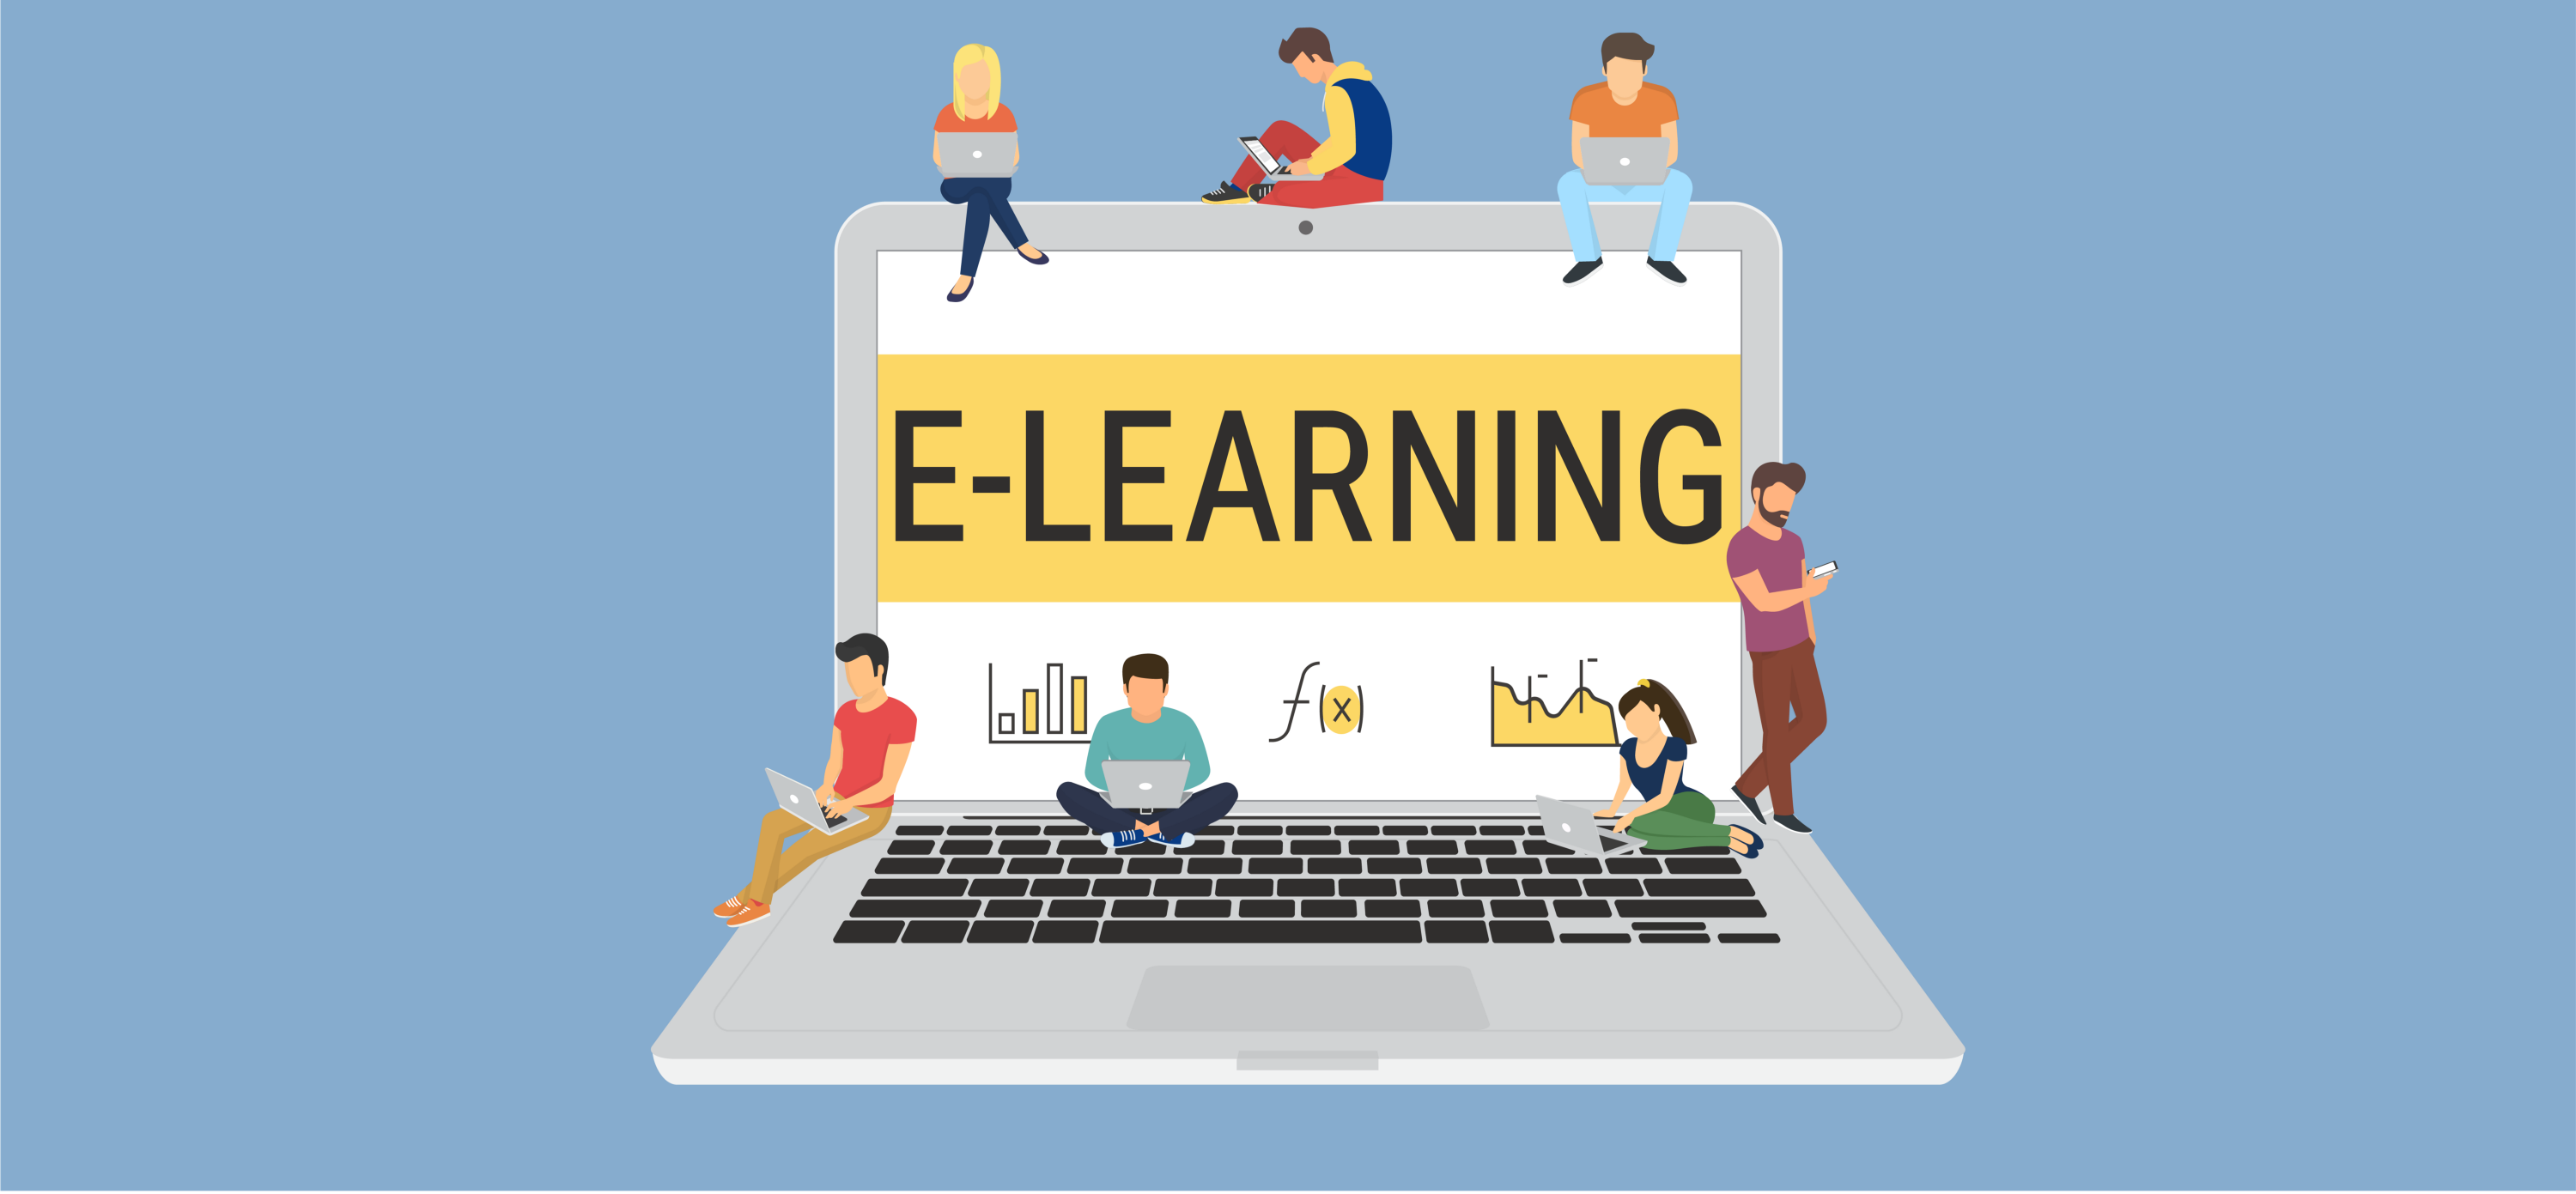 free online courses- learn anything by e-learners points